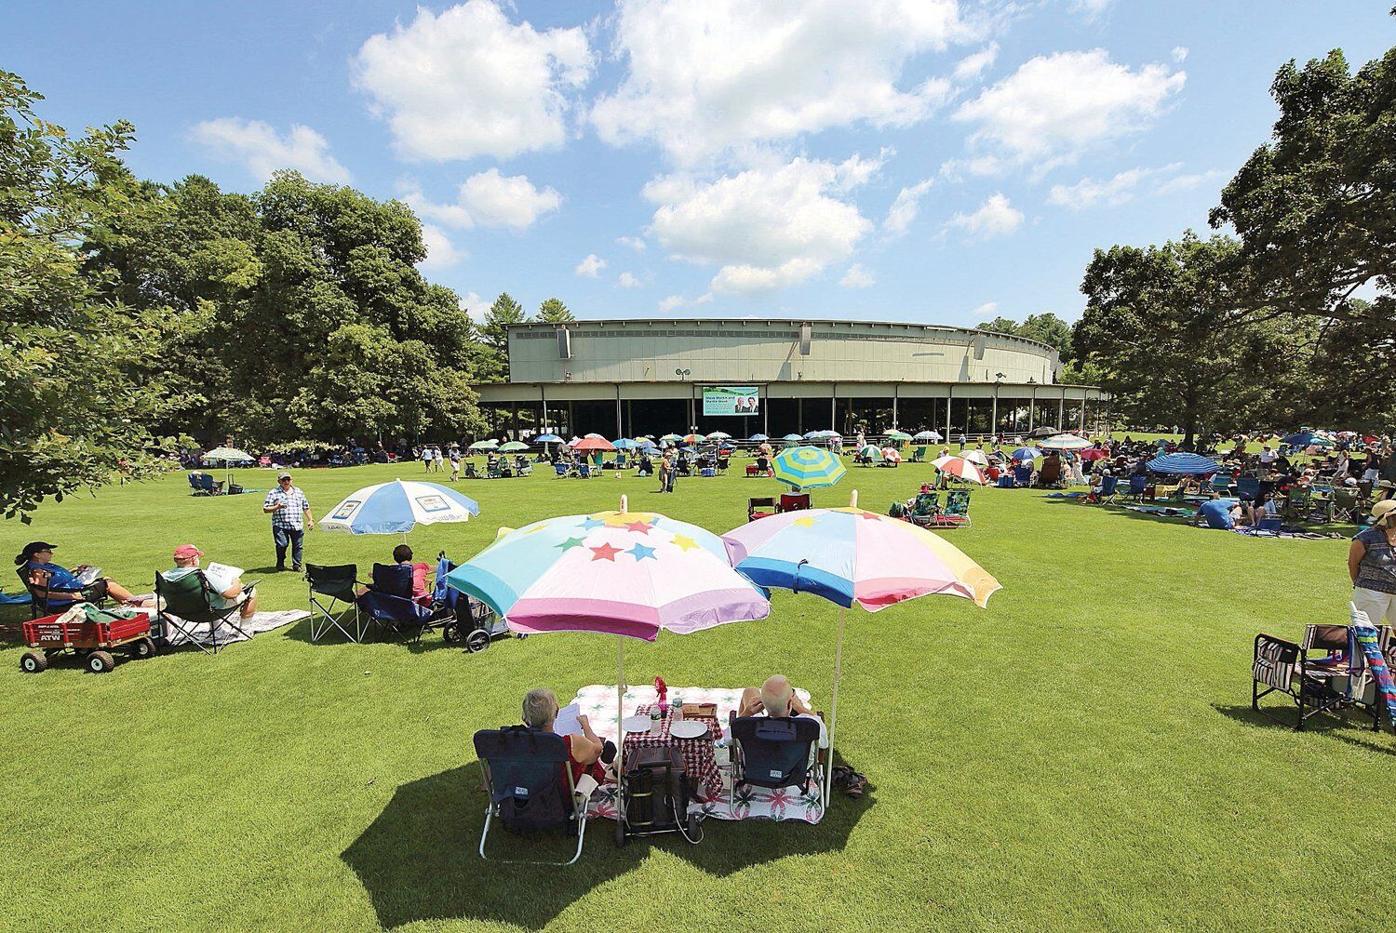 Summer at Tanglewood? Retiring BSO chief sounds note of cautious